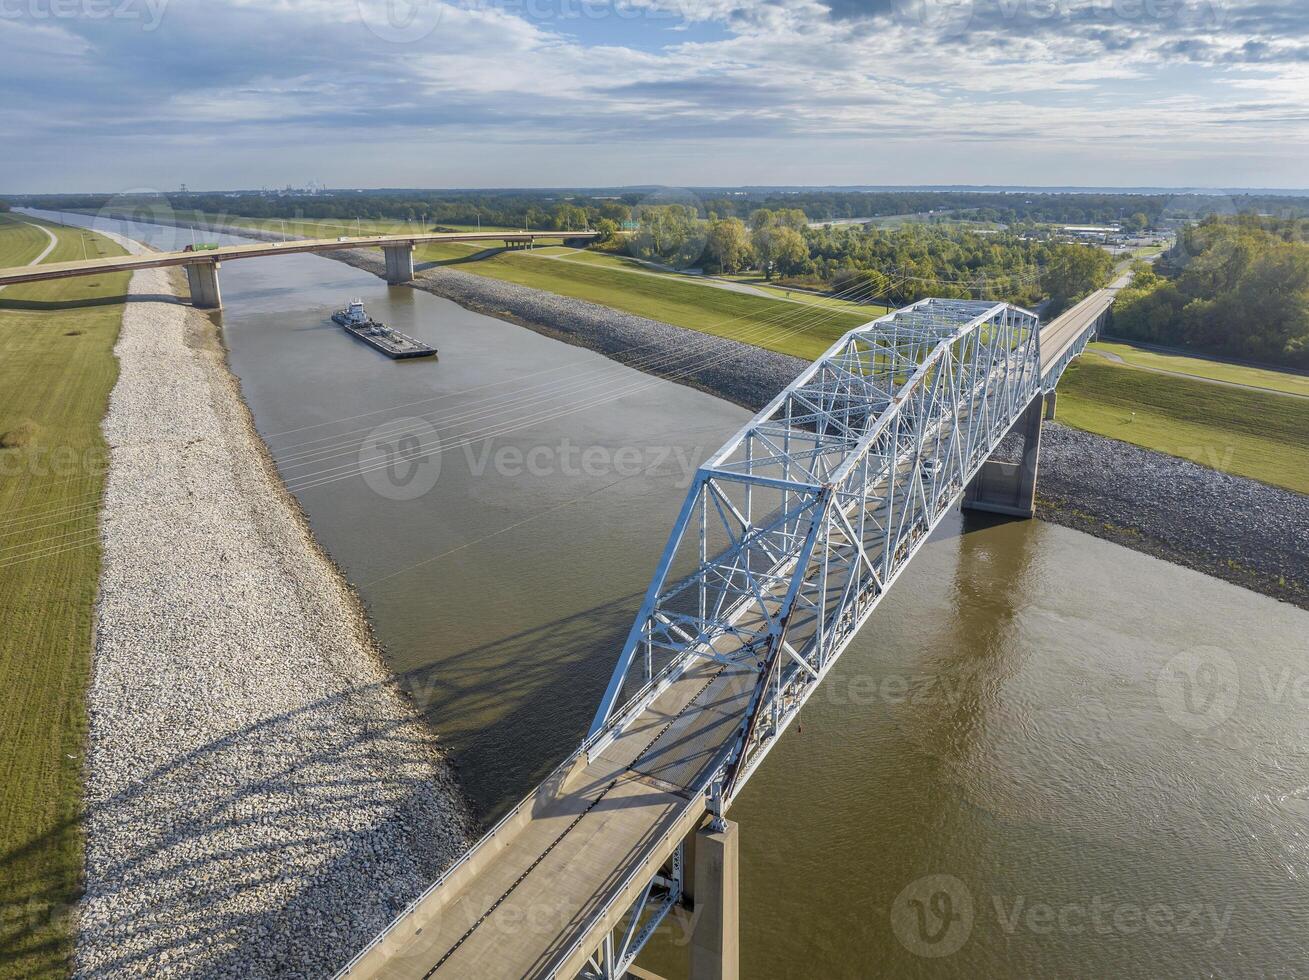 towboats with barges on Chain of Rock Canal of Mississipi River above St Louis, aerial view in October scenery photo